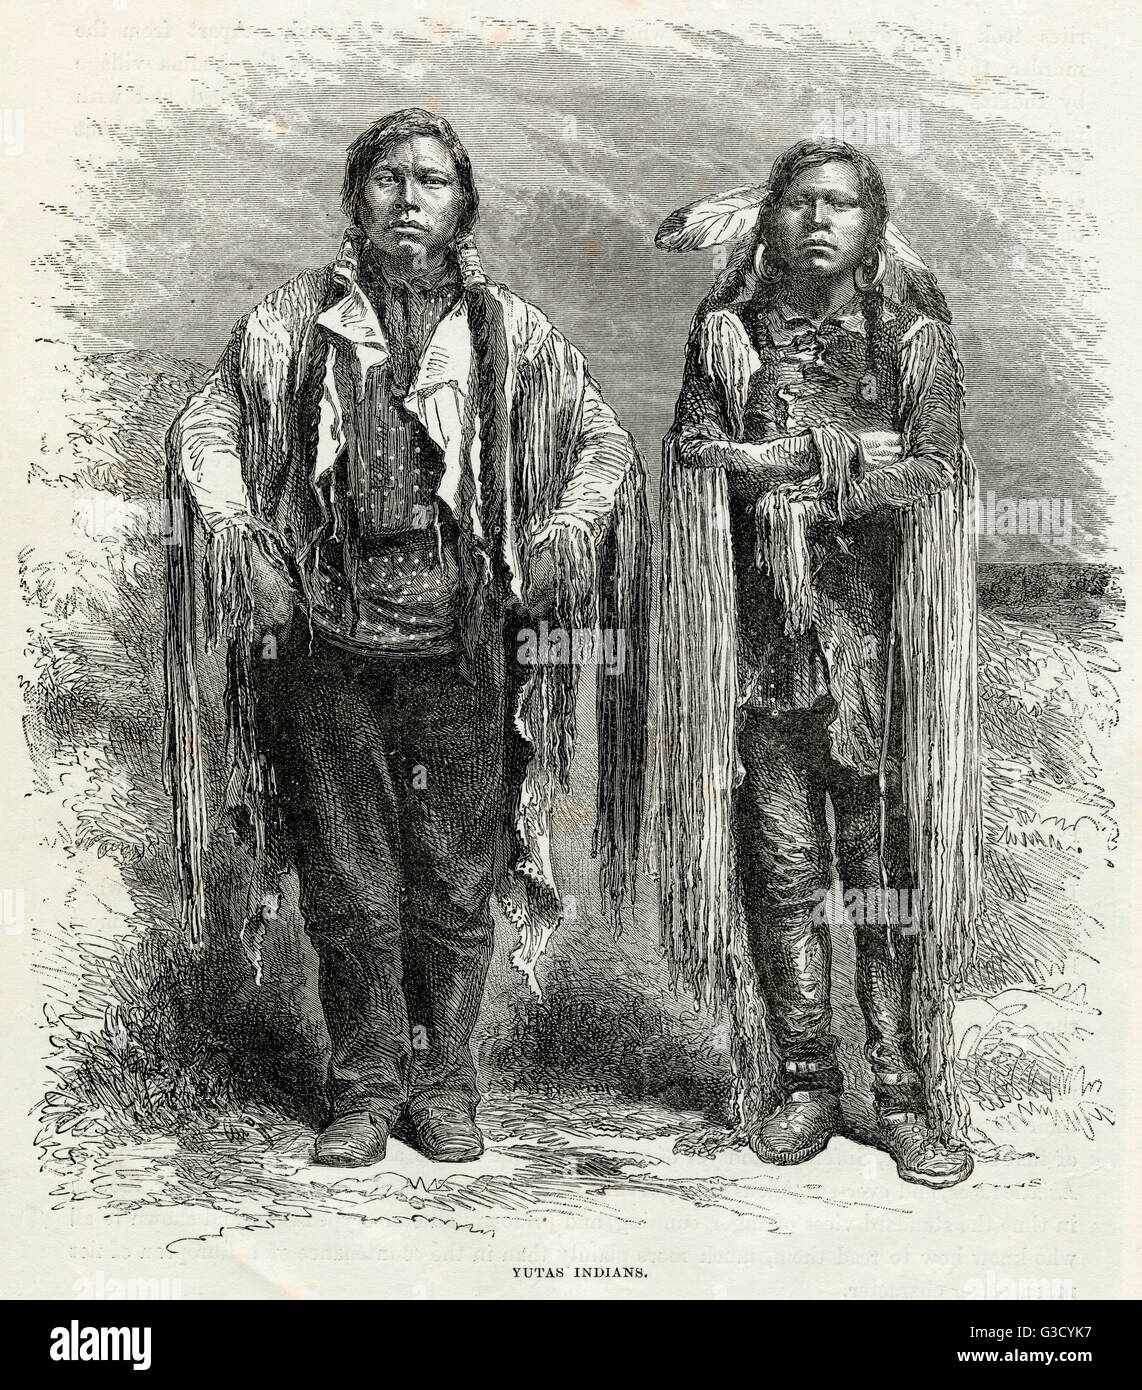 Yutas Indians, Ute Indians were a group of Indians that lived mostly around the mountainous area of Utah and Colorado near the Colorado River. Wearing traditional clothing long hair and feathers.      Date: Circa 1870 Stock Photo